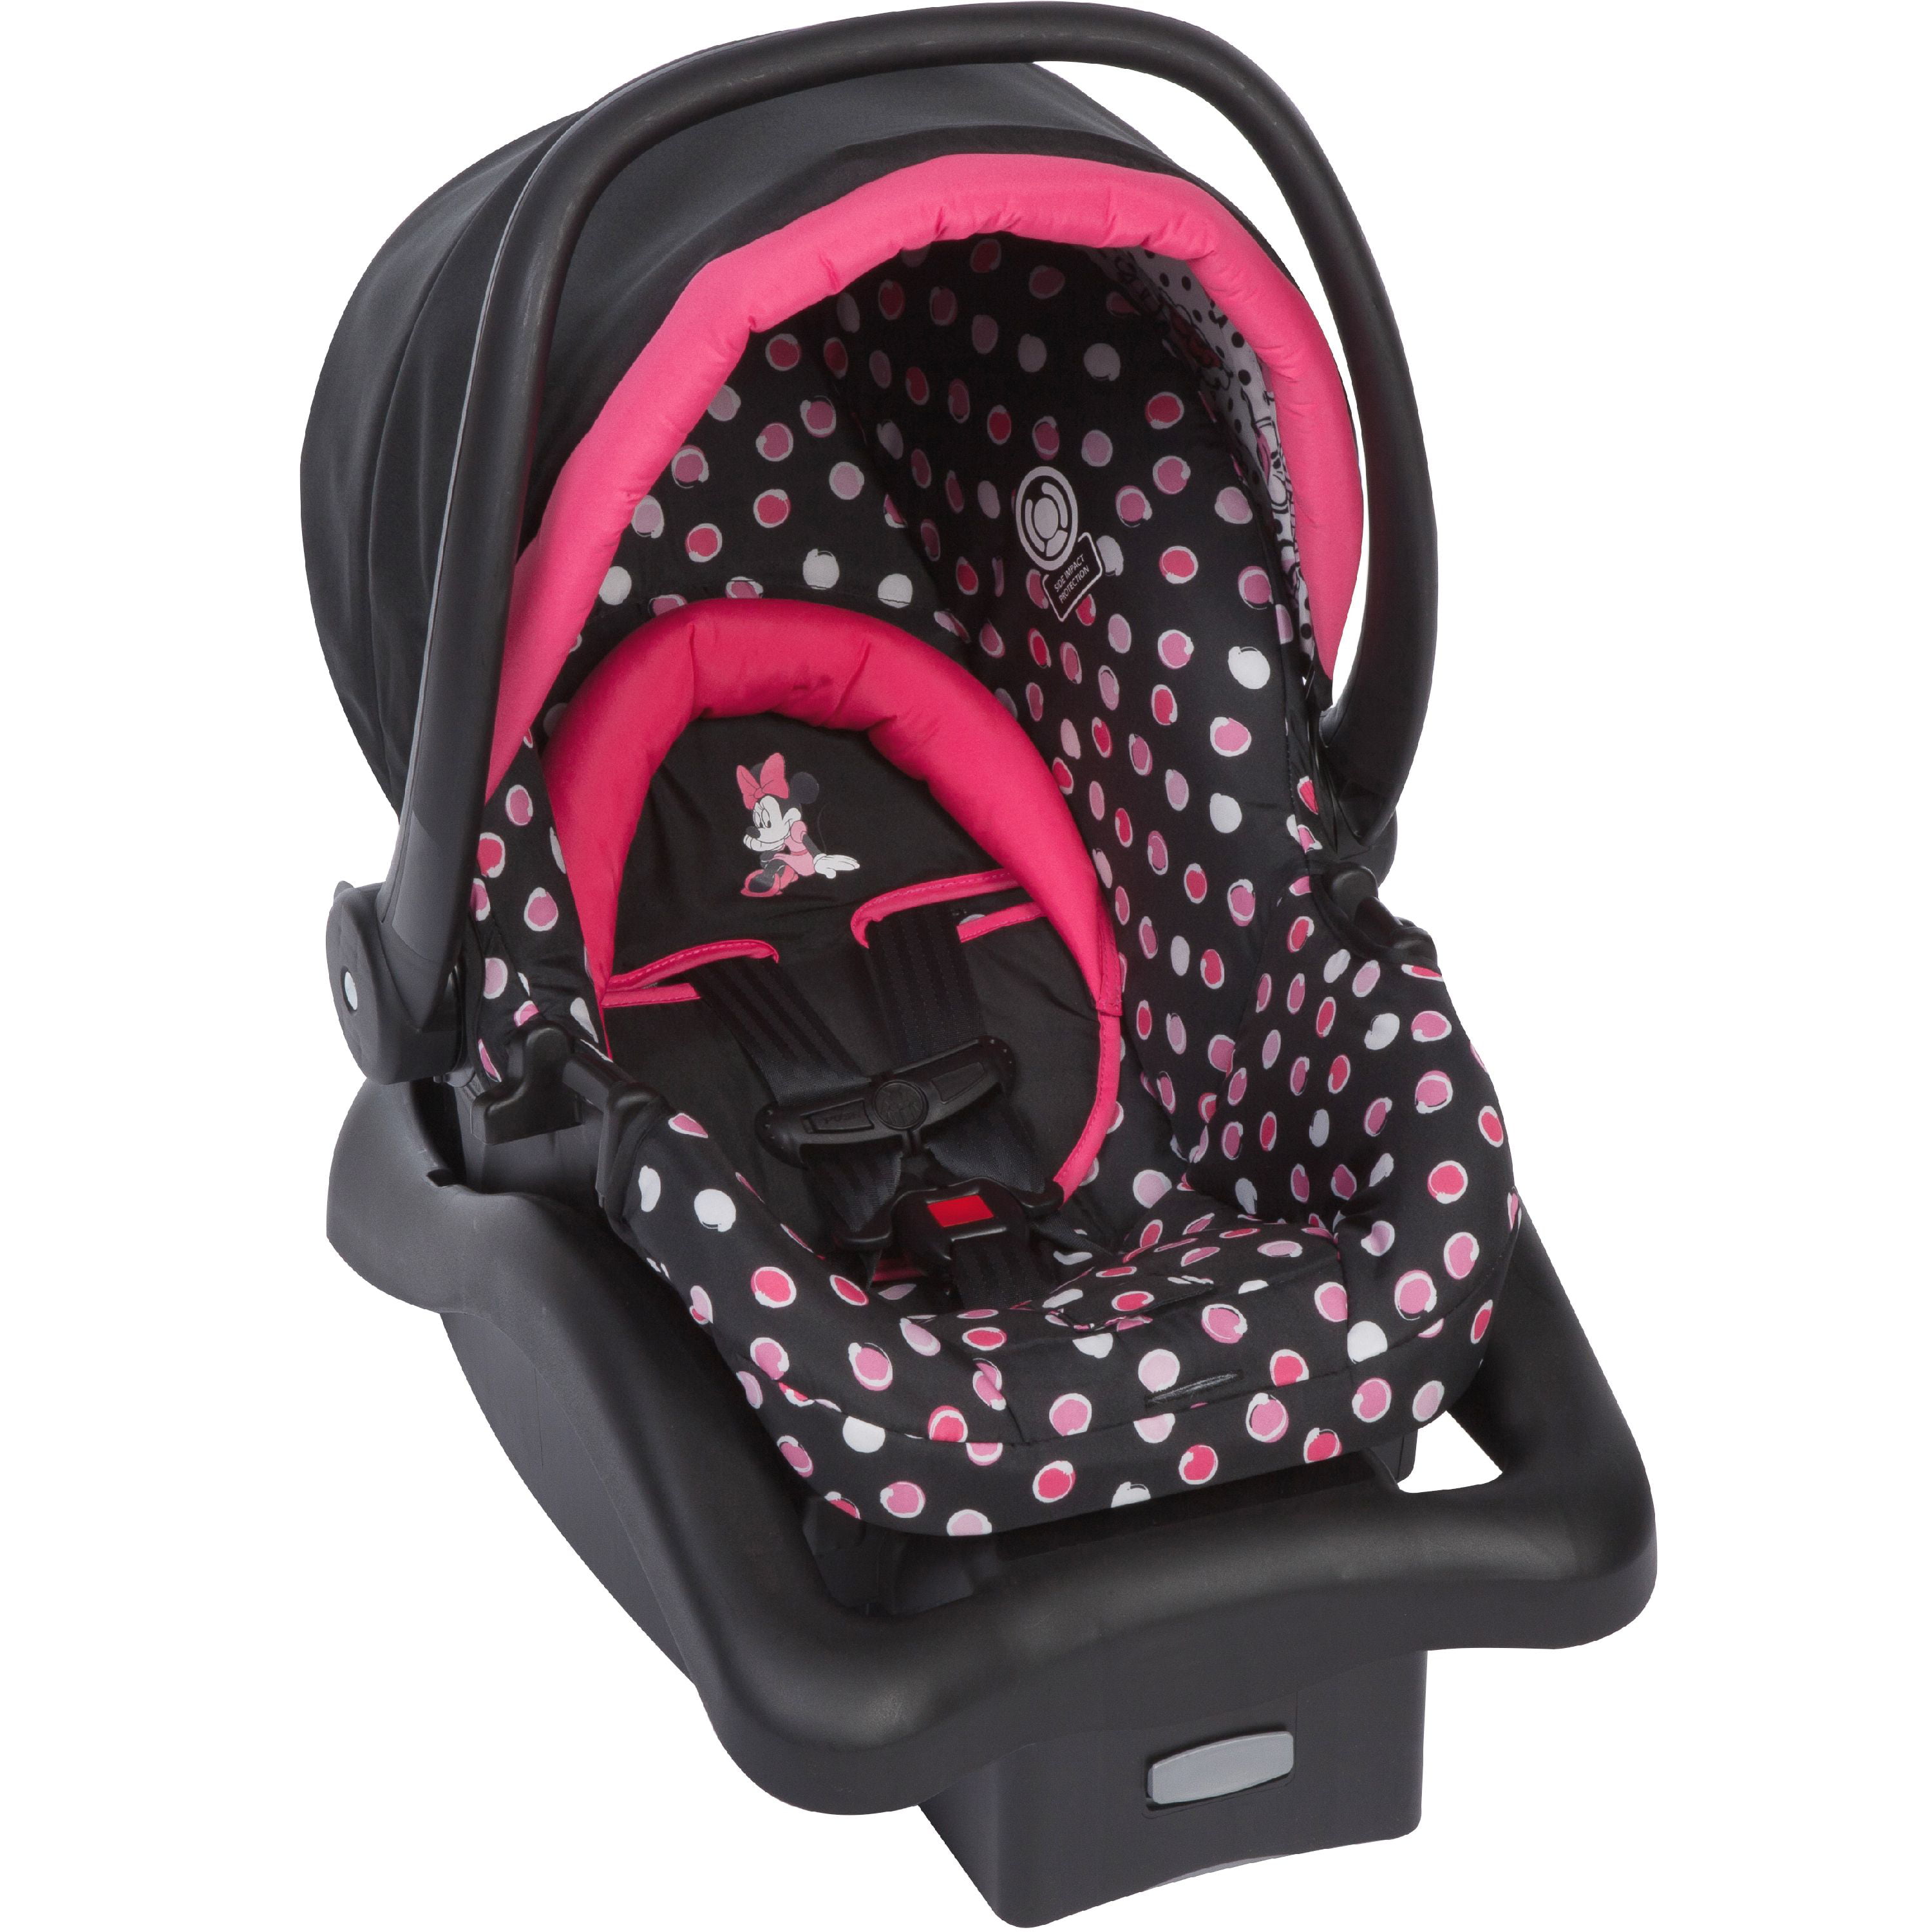 minnie mouse car seat and stroller walmart